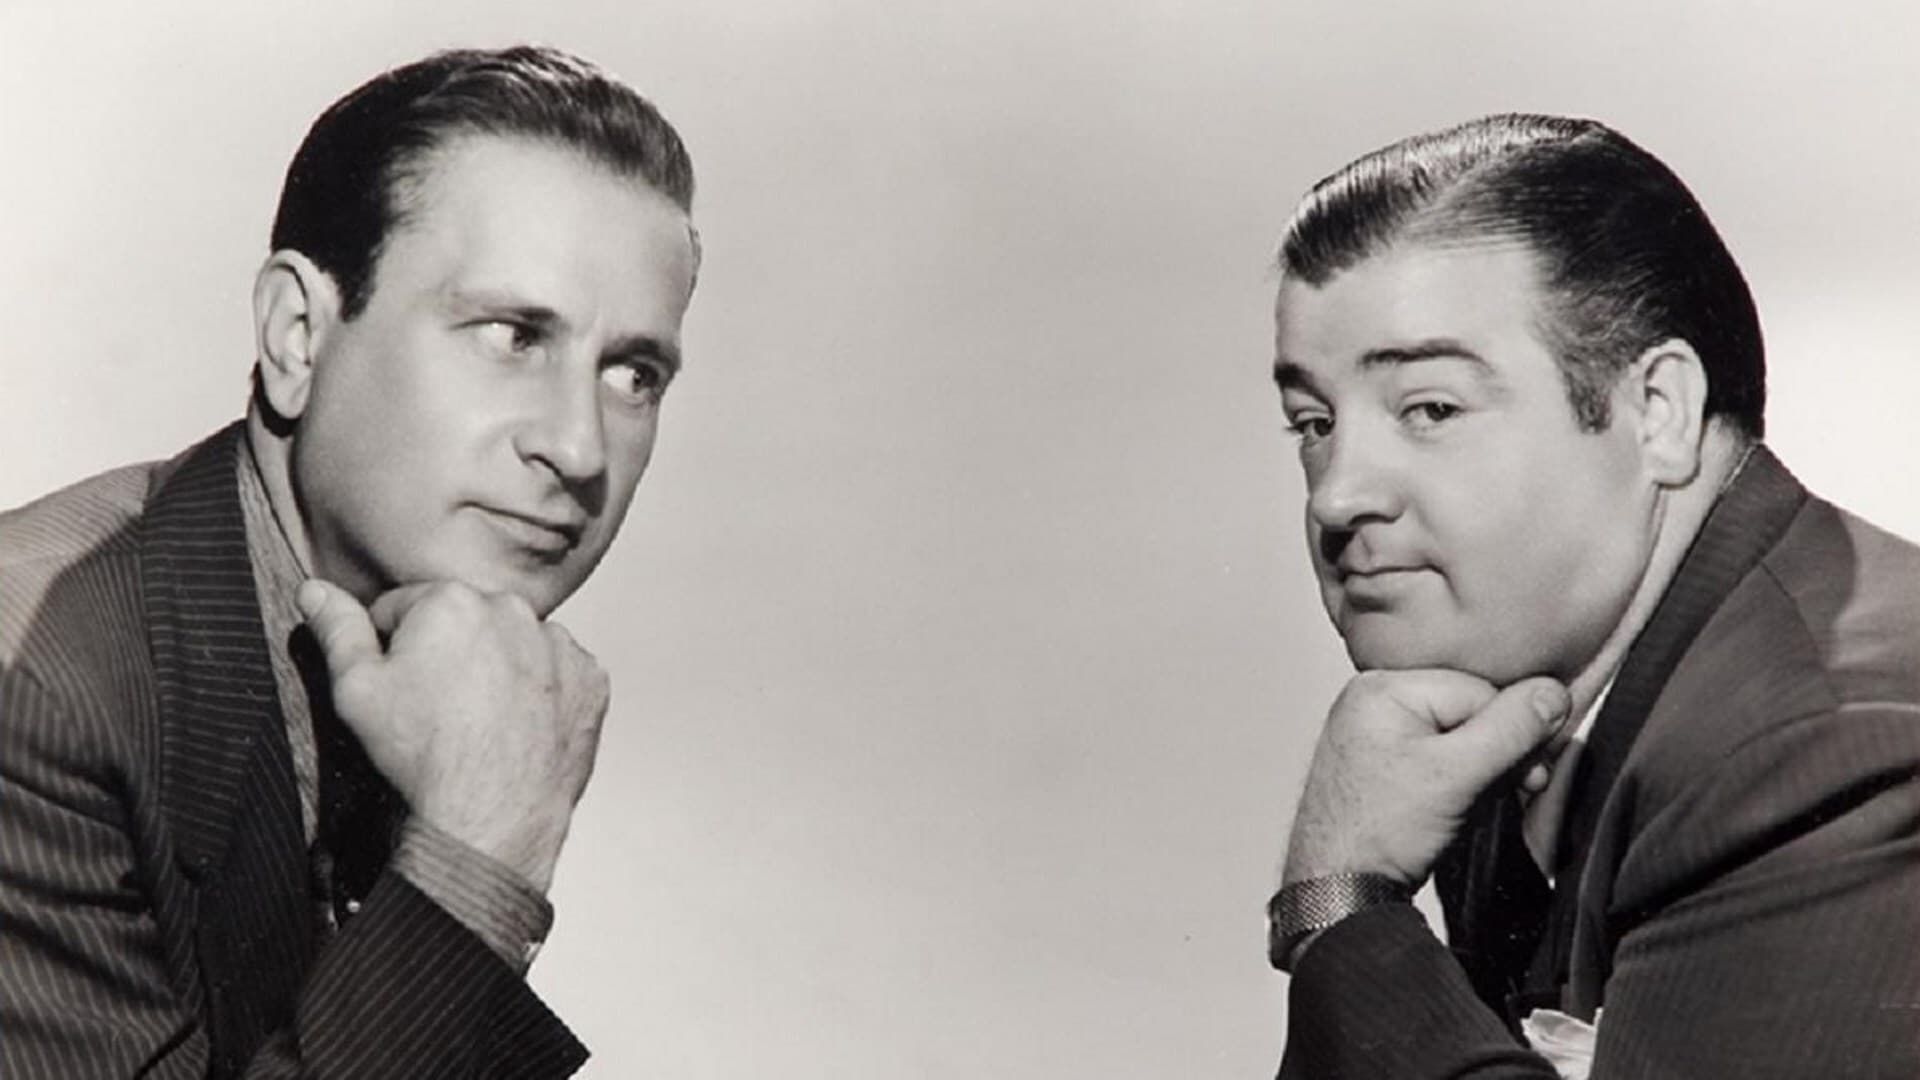 The Abbott and Costello Show background